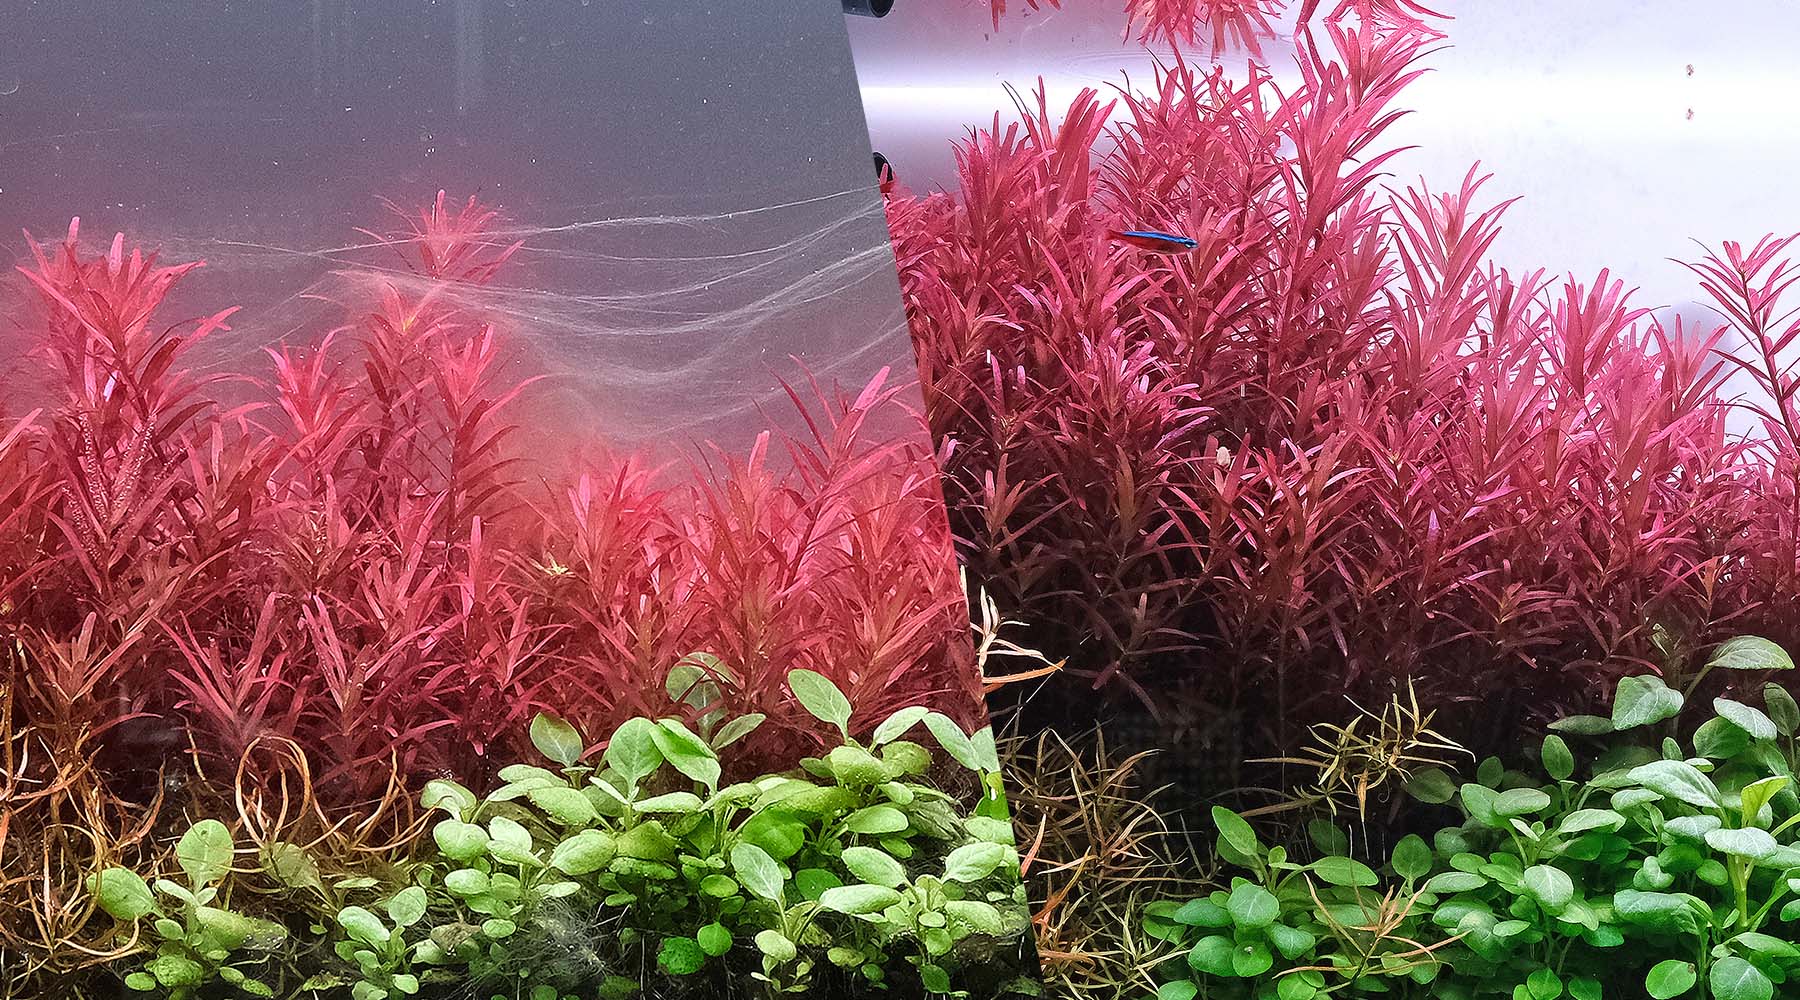 How do you control algae naturally? Read here to learn how to achieve your algae free tanks.